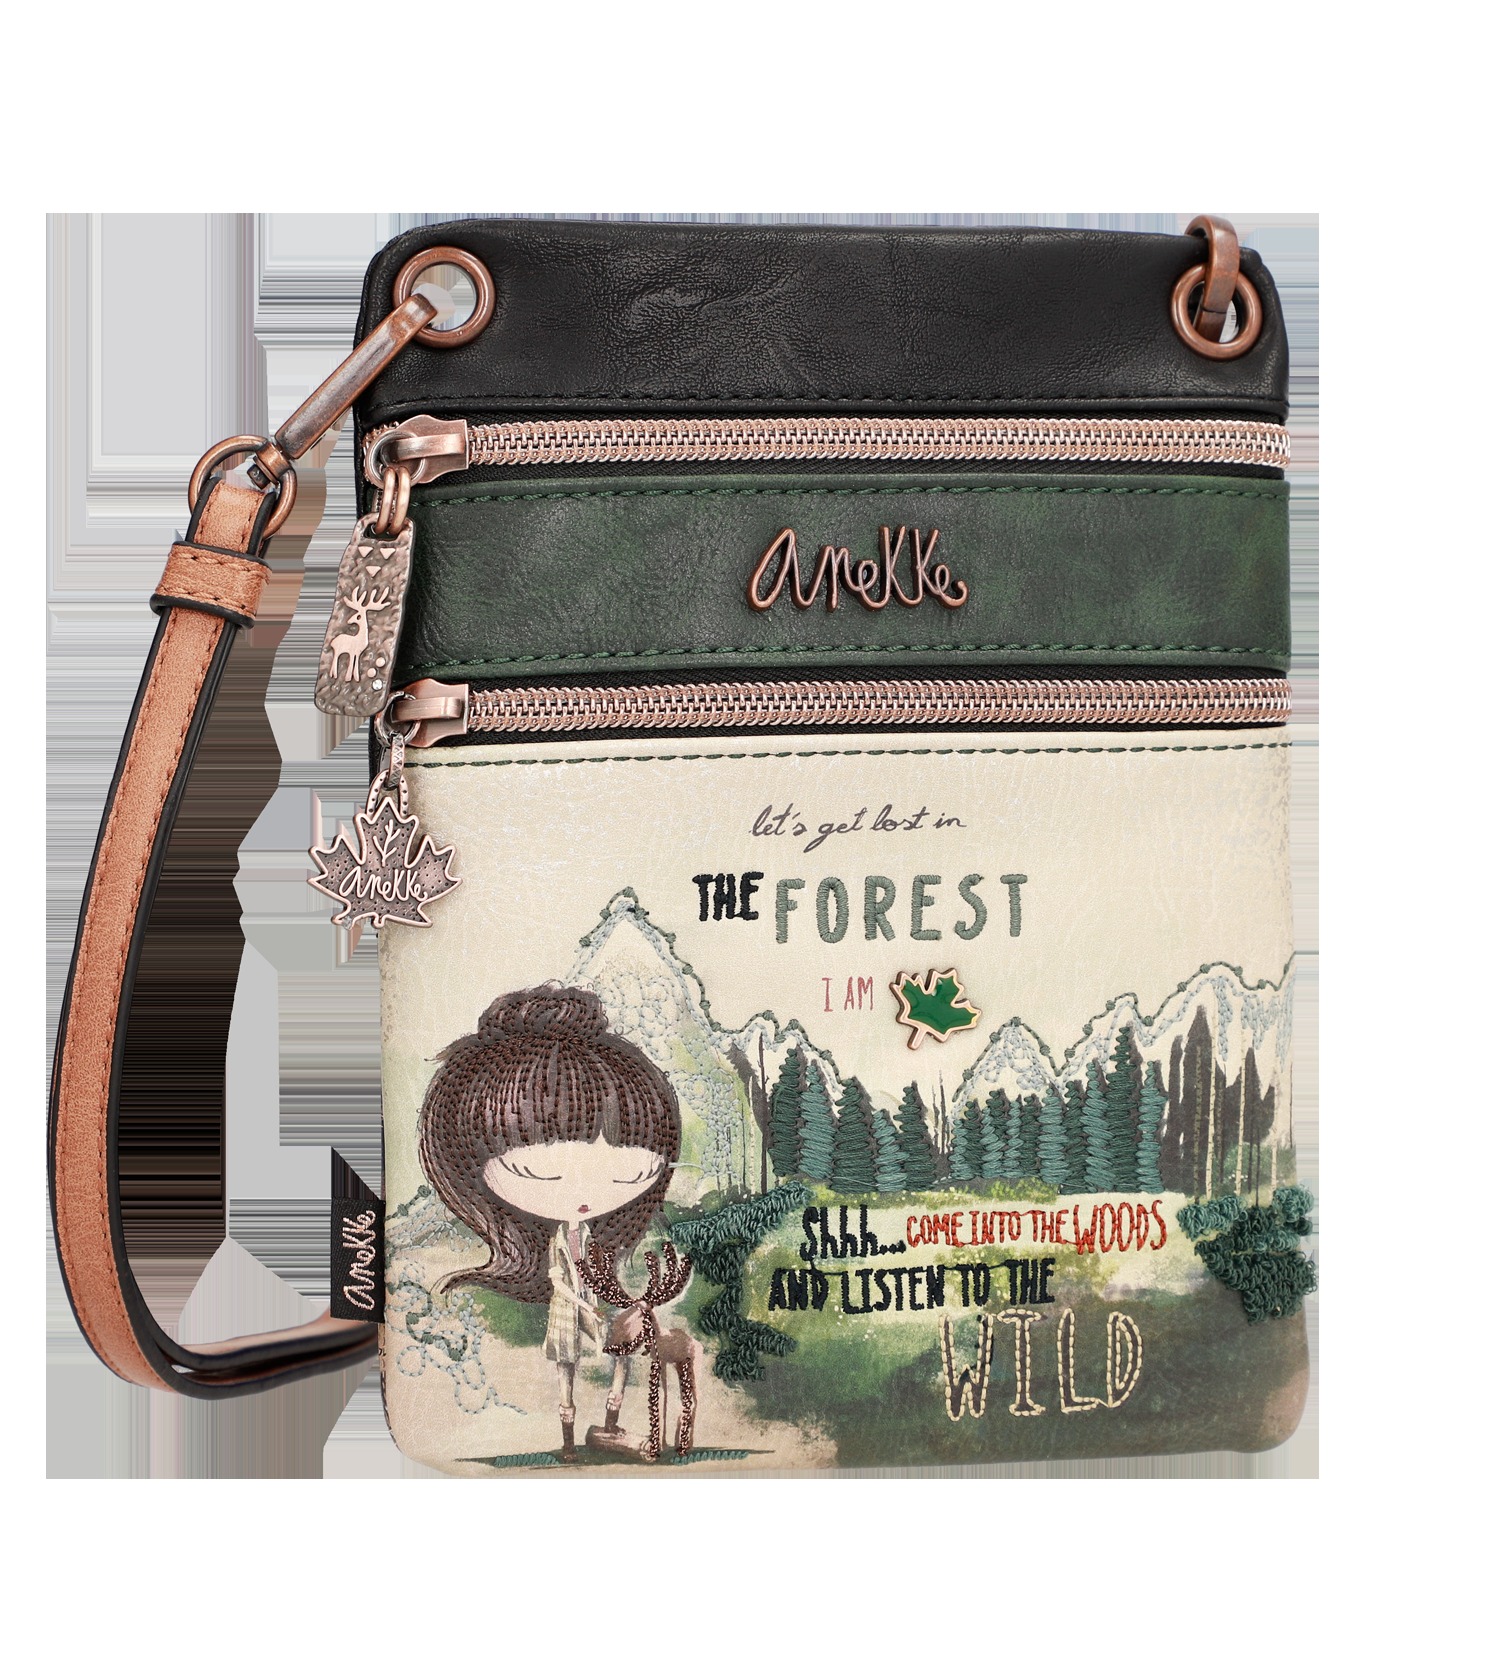 BOLSO ANEKKE CANADA FOREST 35603-905